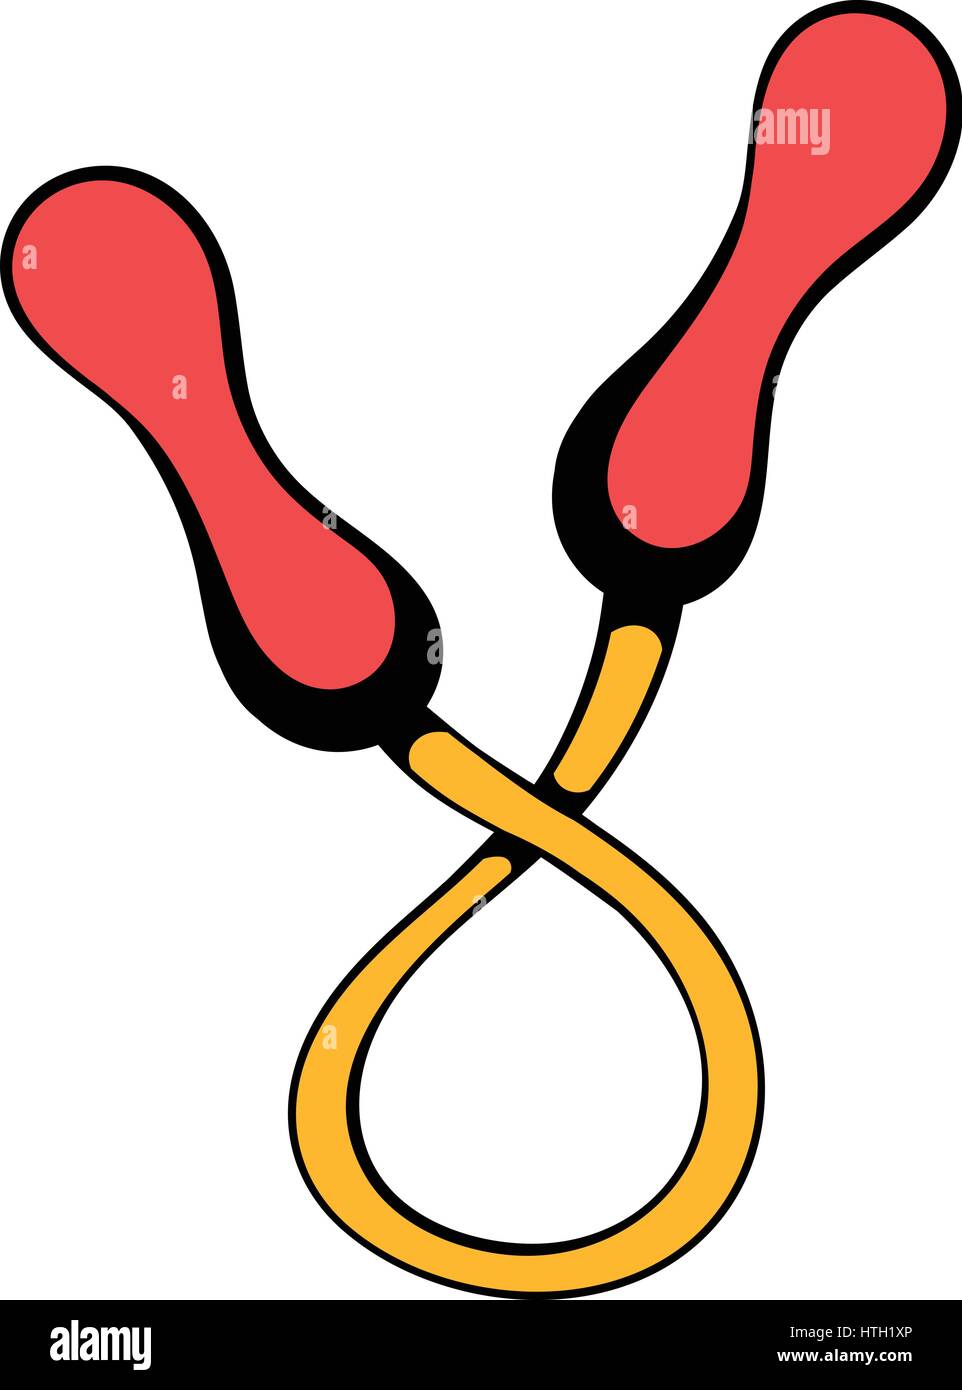 Skipping rope icon, icon cartoon Stock Vector